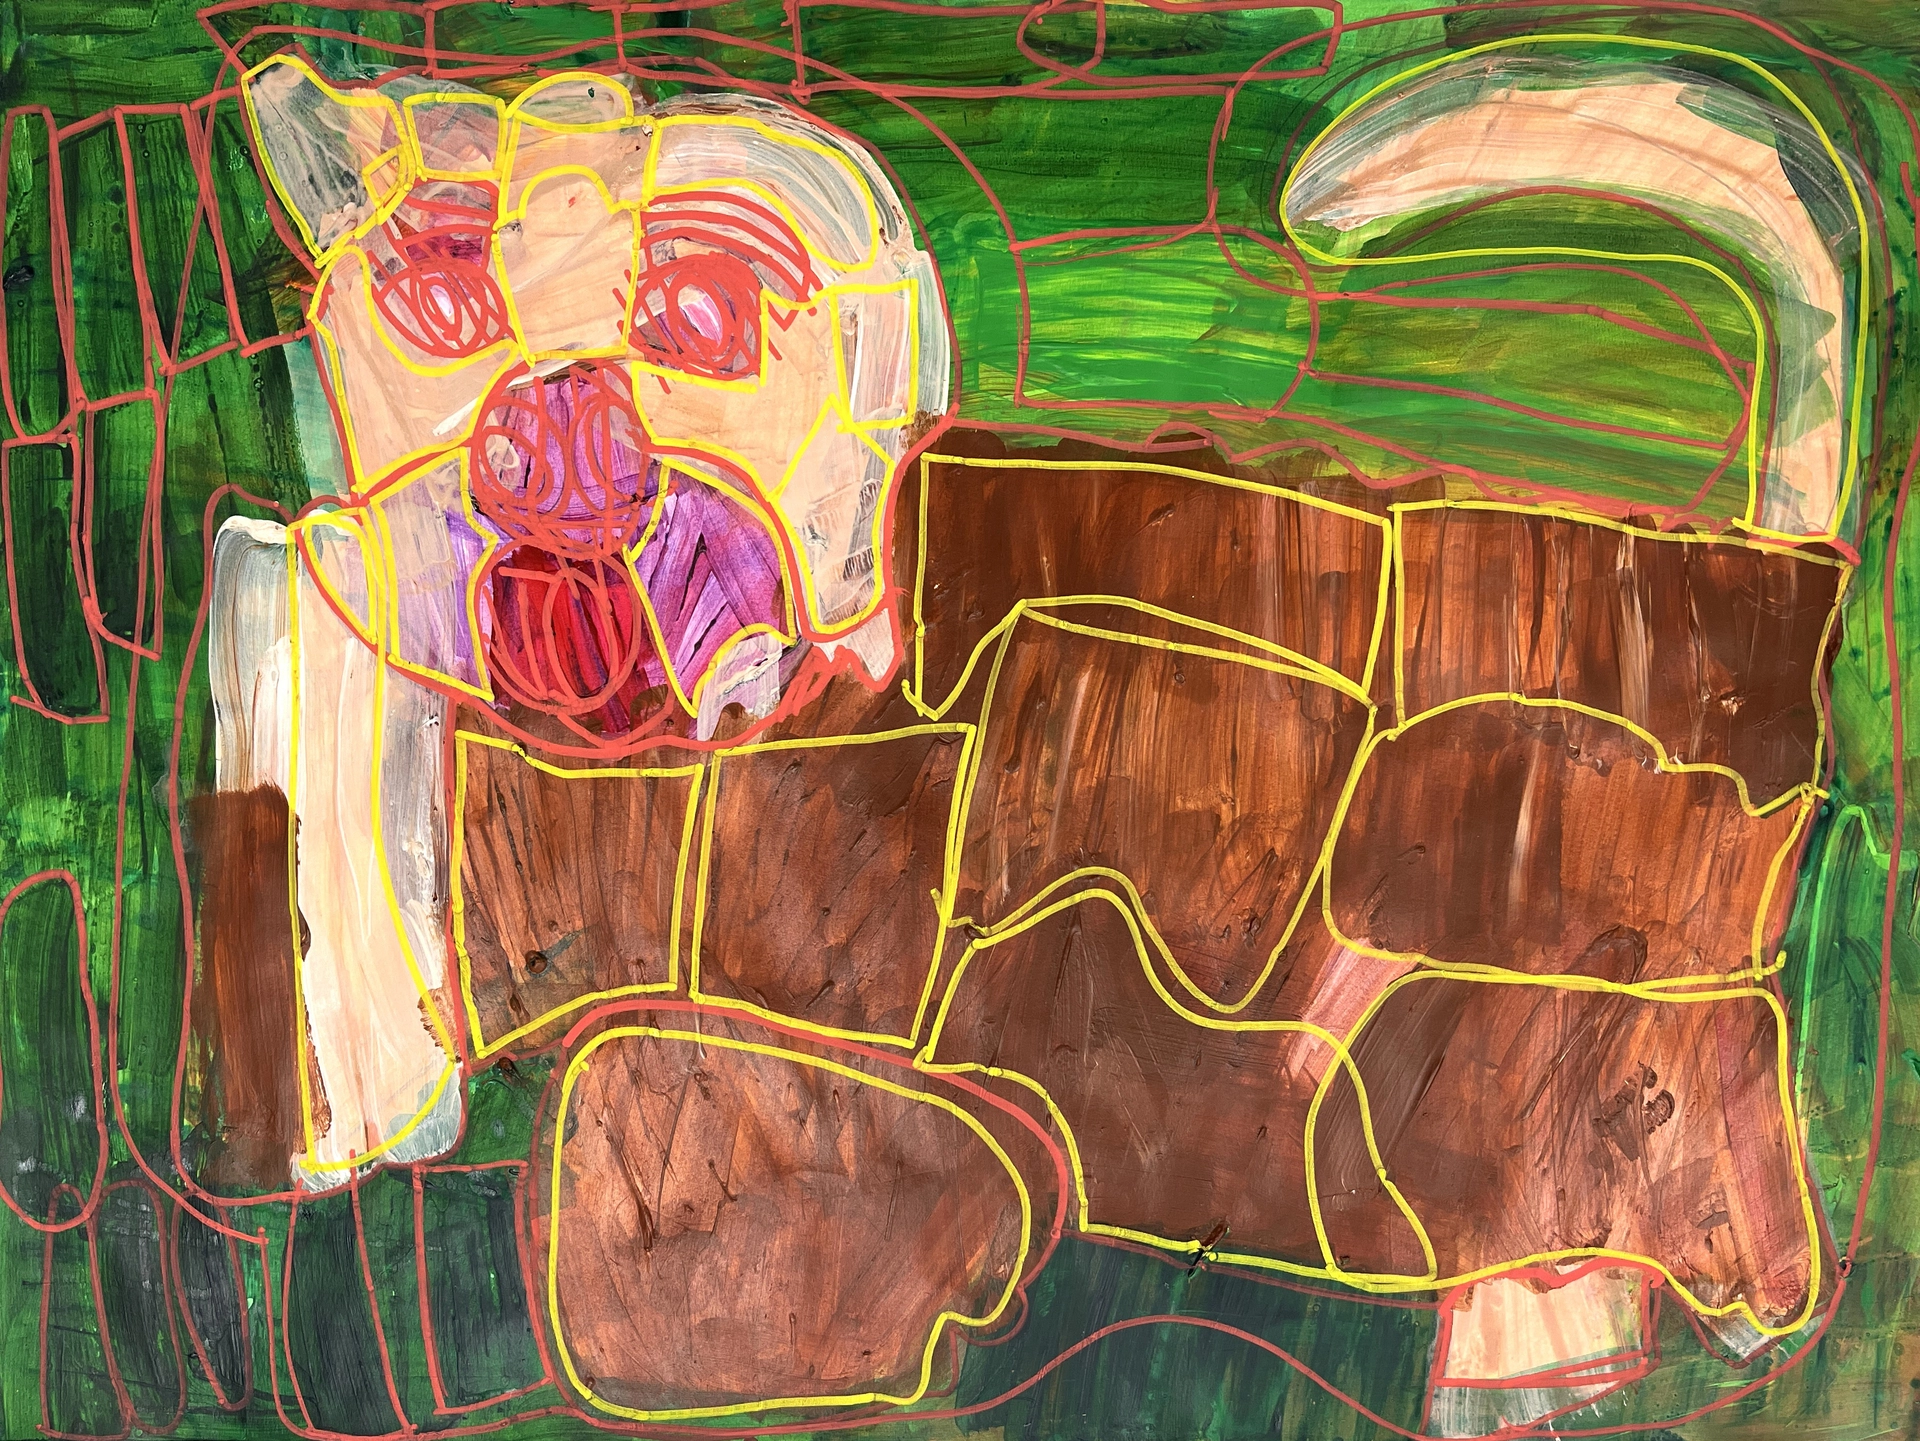 A stylized dog thickly painted in brown, tan, and magenta strokes, with multiple areas outlined in a relatively thin and consistent line of yellow and pink paint pen. The green background has been similarly treated, with thick passages and lined strokes, giving the image both a looseness and delineation, movement and stability.